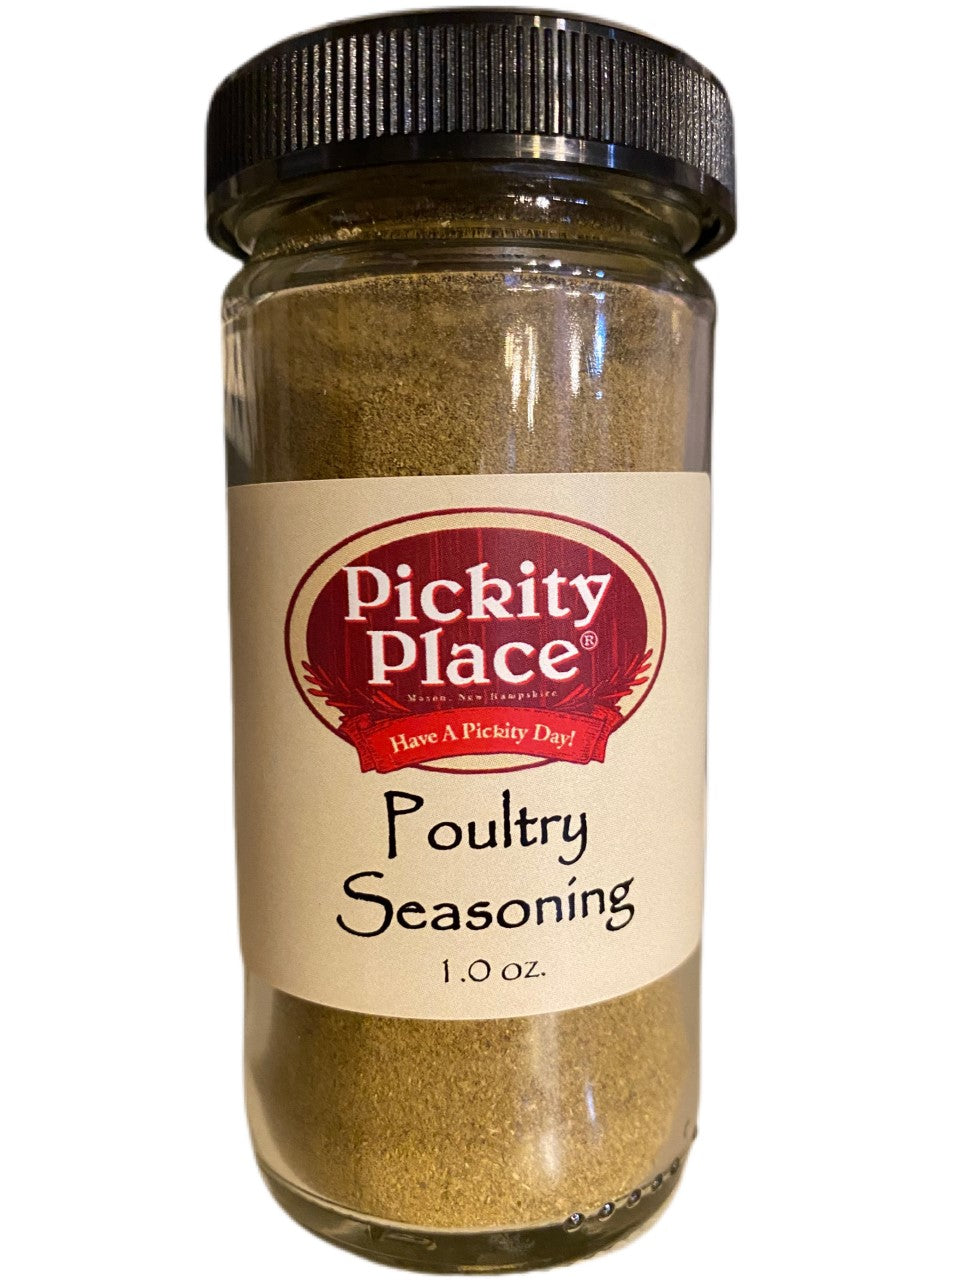 Pickity Place — Poultry Seasoning